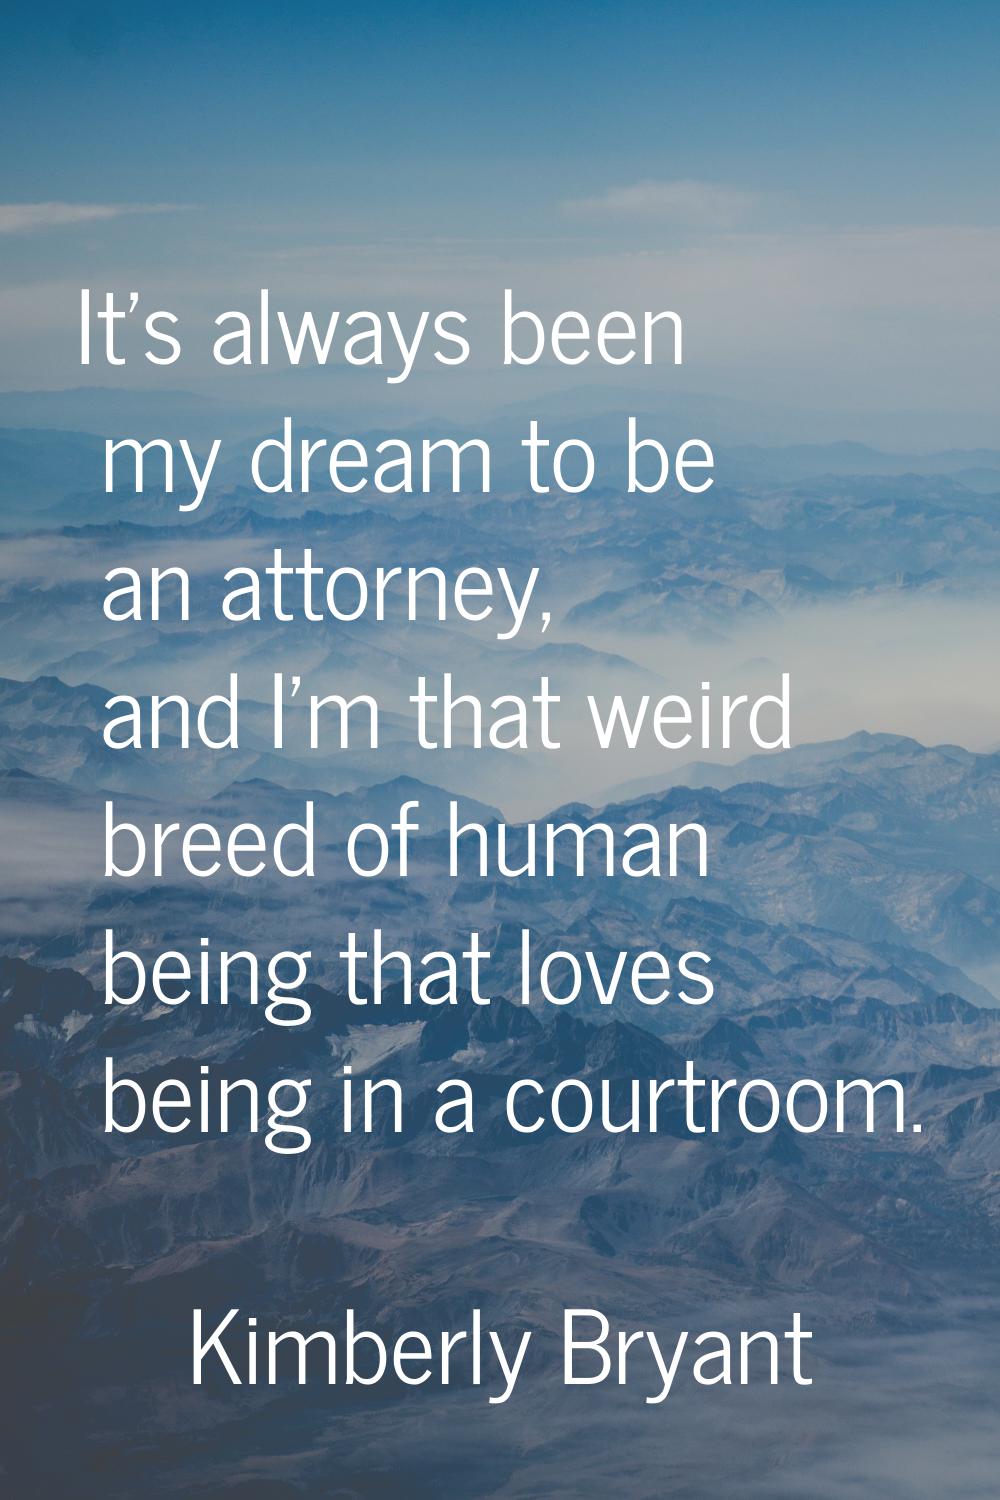 It's always been my dream to be an attorney, and I'm that weird breed of human being that loves bei